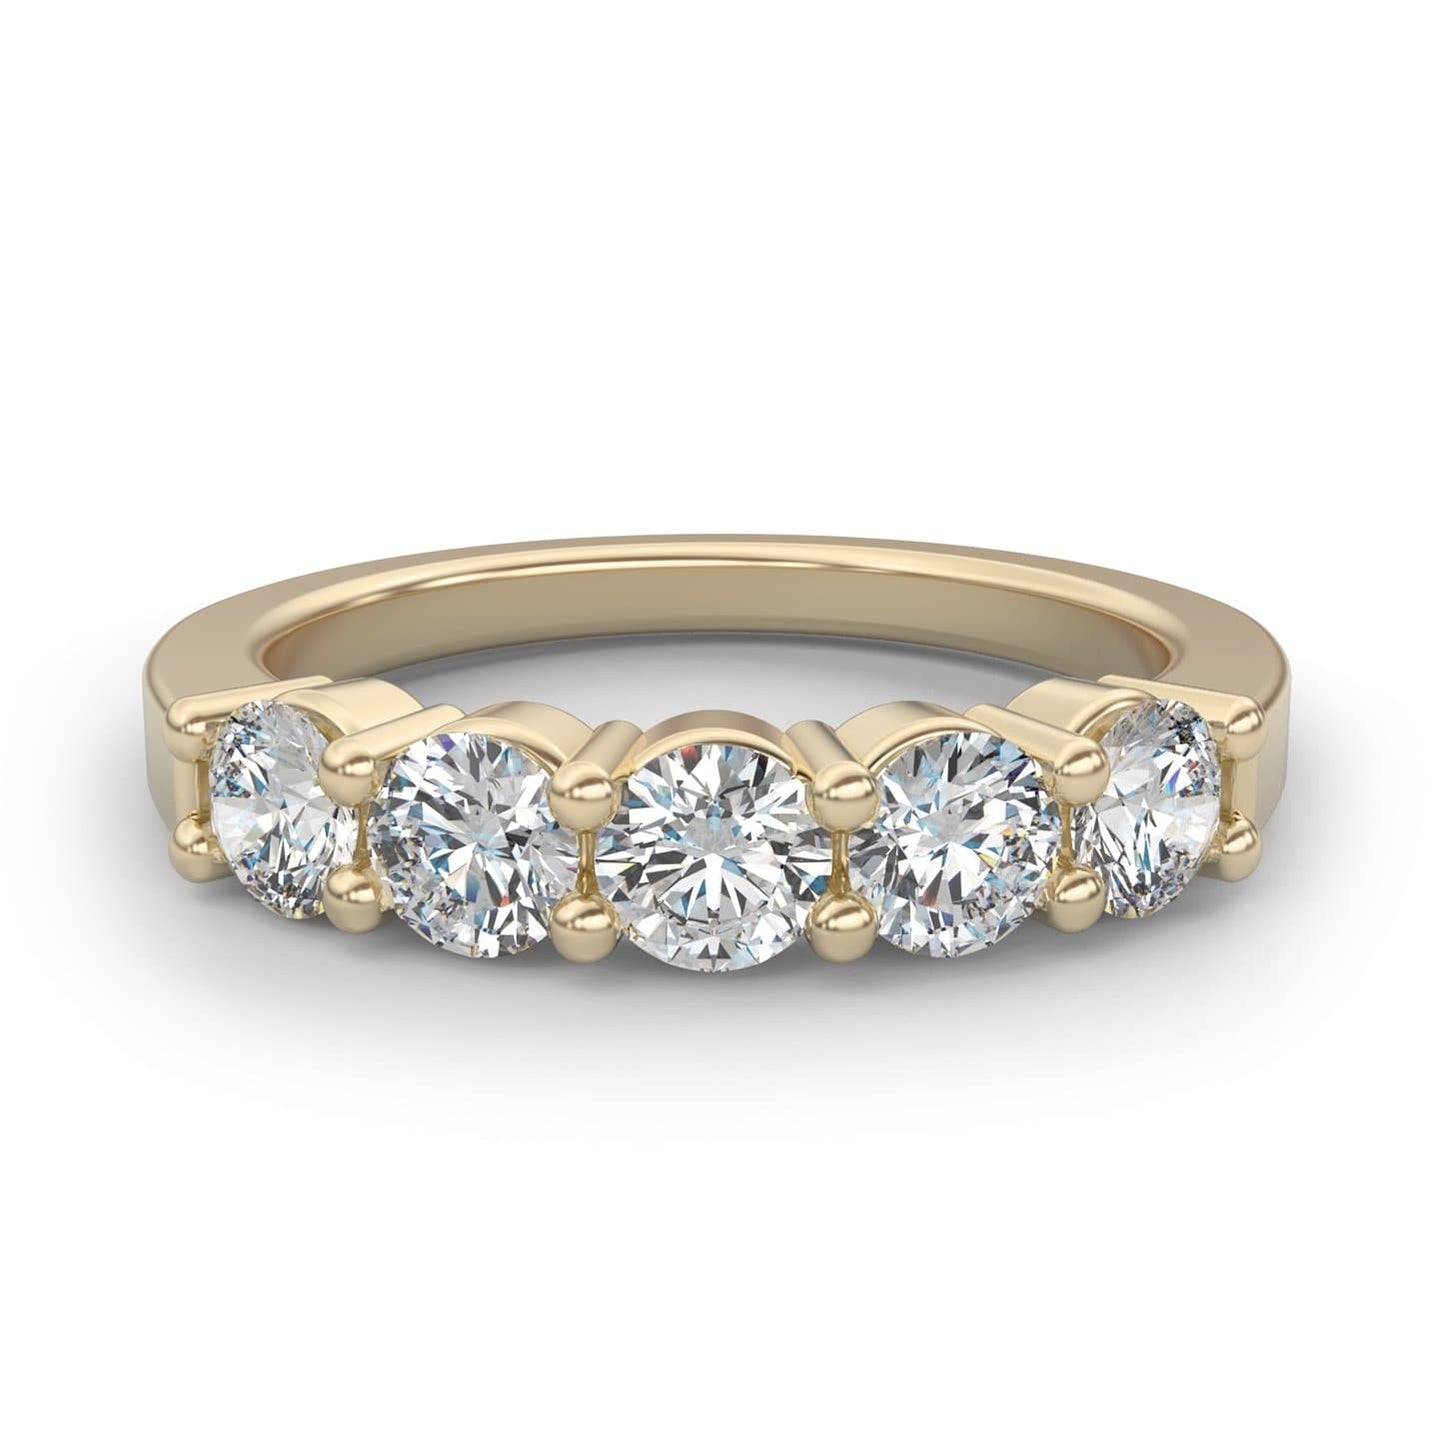 1.25ct Five Stone Shared Prong Semi-Eternity in 14k Gold